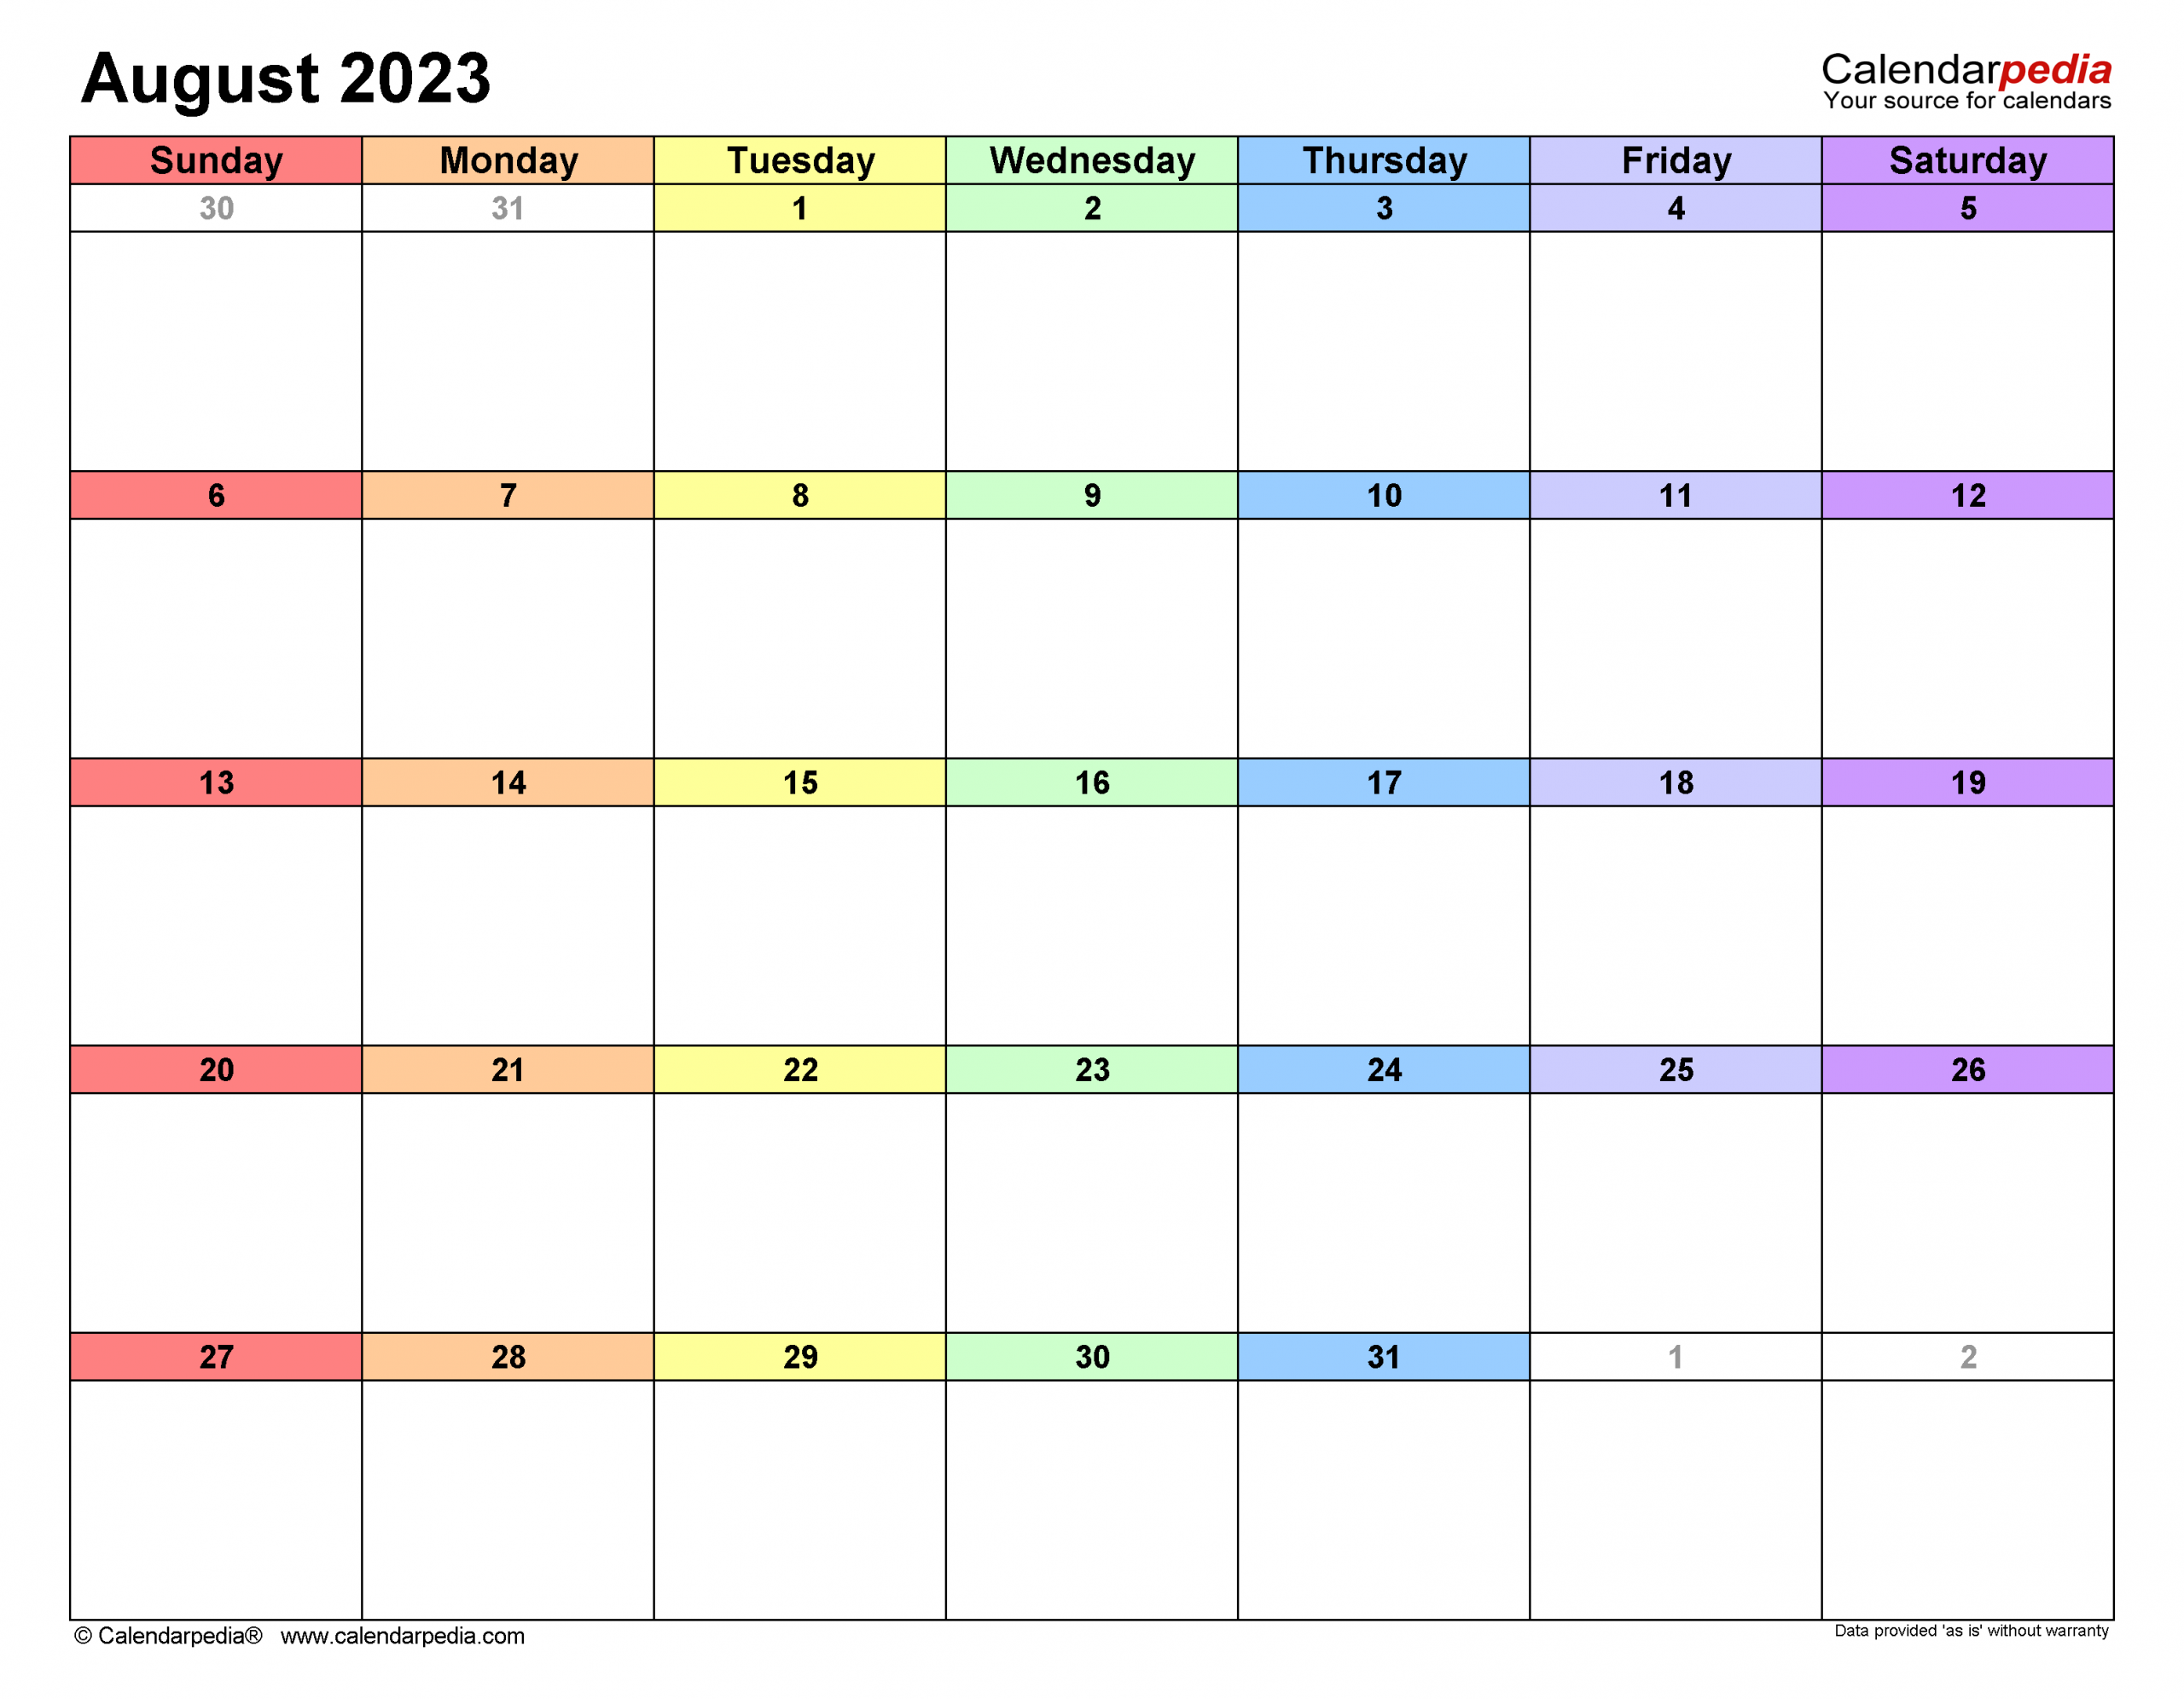 August 2023 Calendar | Templates For Word, Excel And Pdf